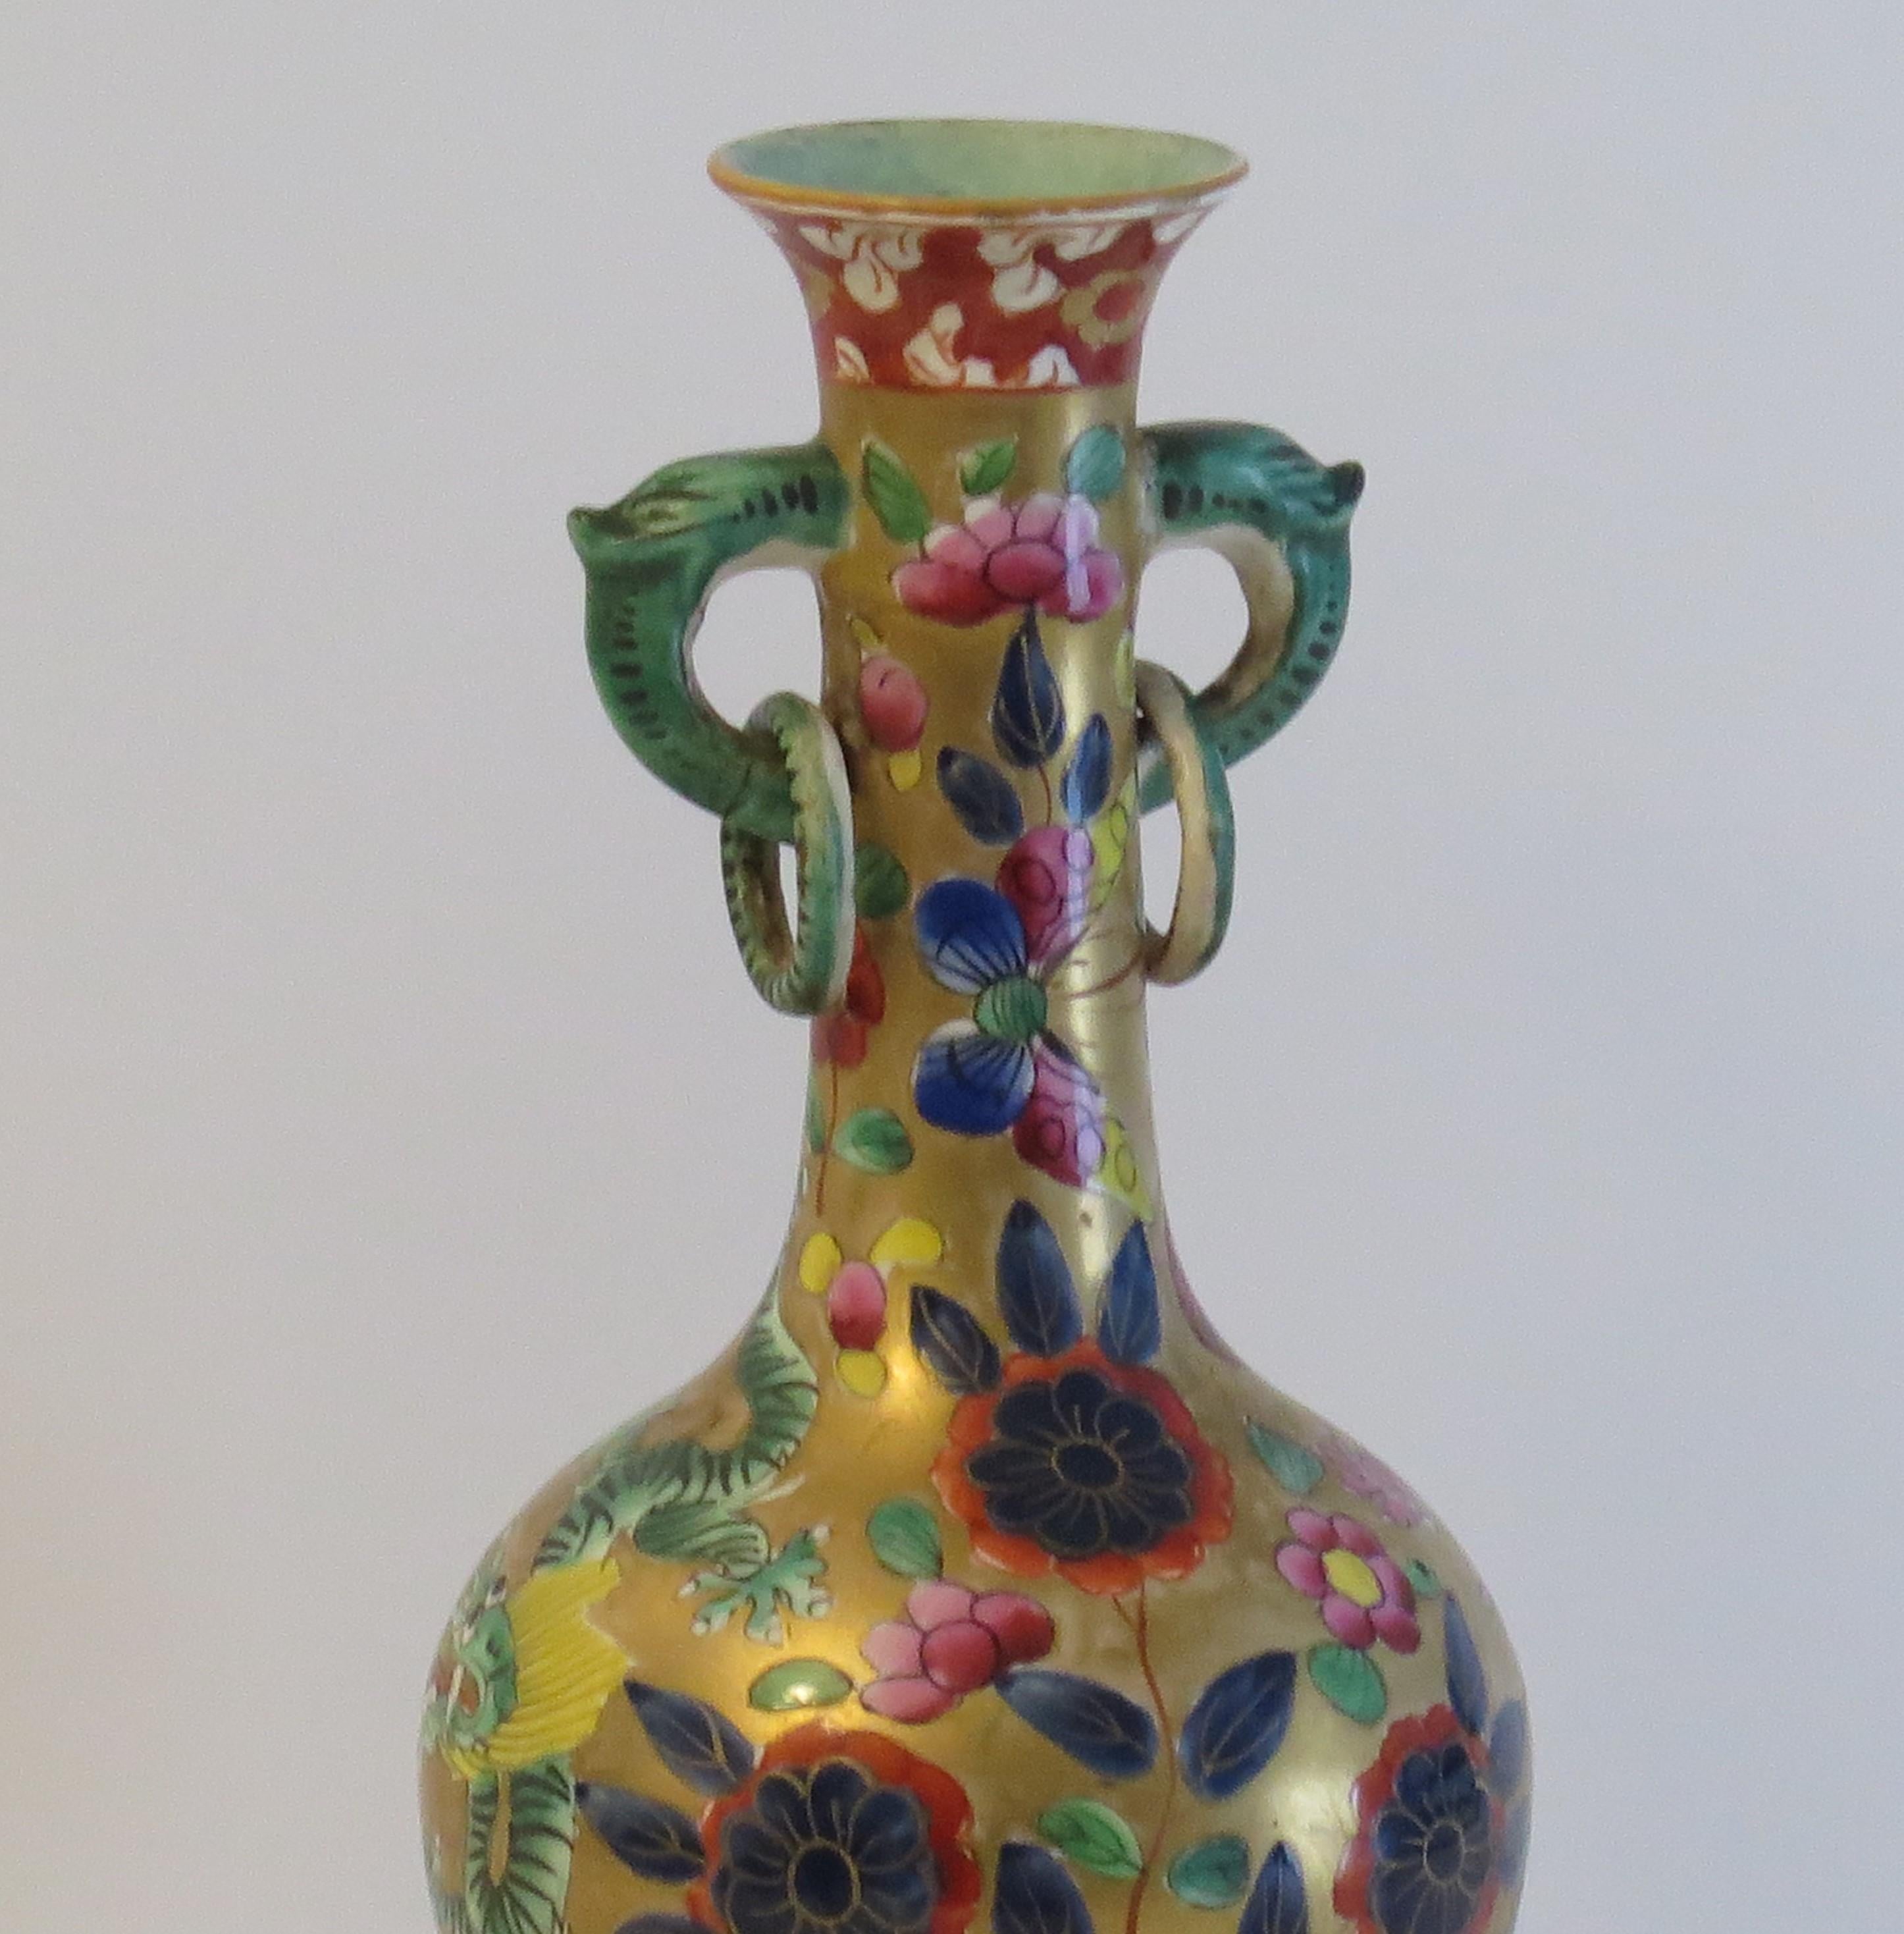 English Very Rare Mason's Ironstone Bottle Vase in Chinese Dragon Pattern, circa 1820 For Sale